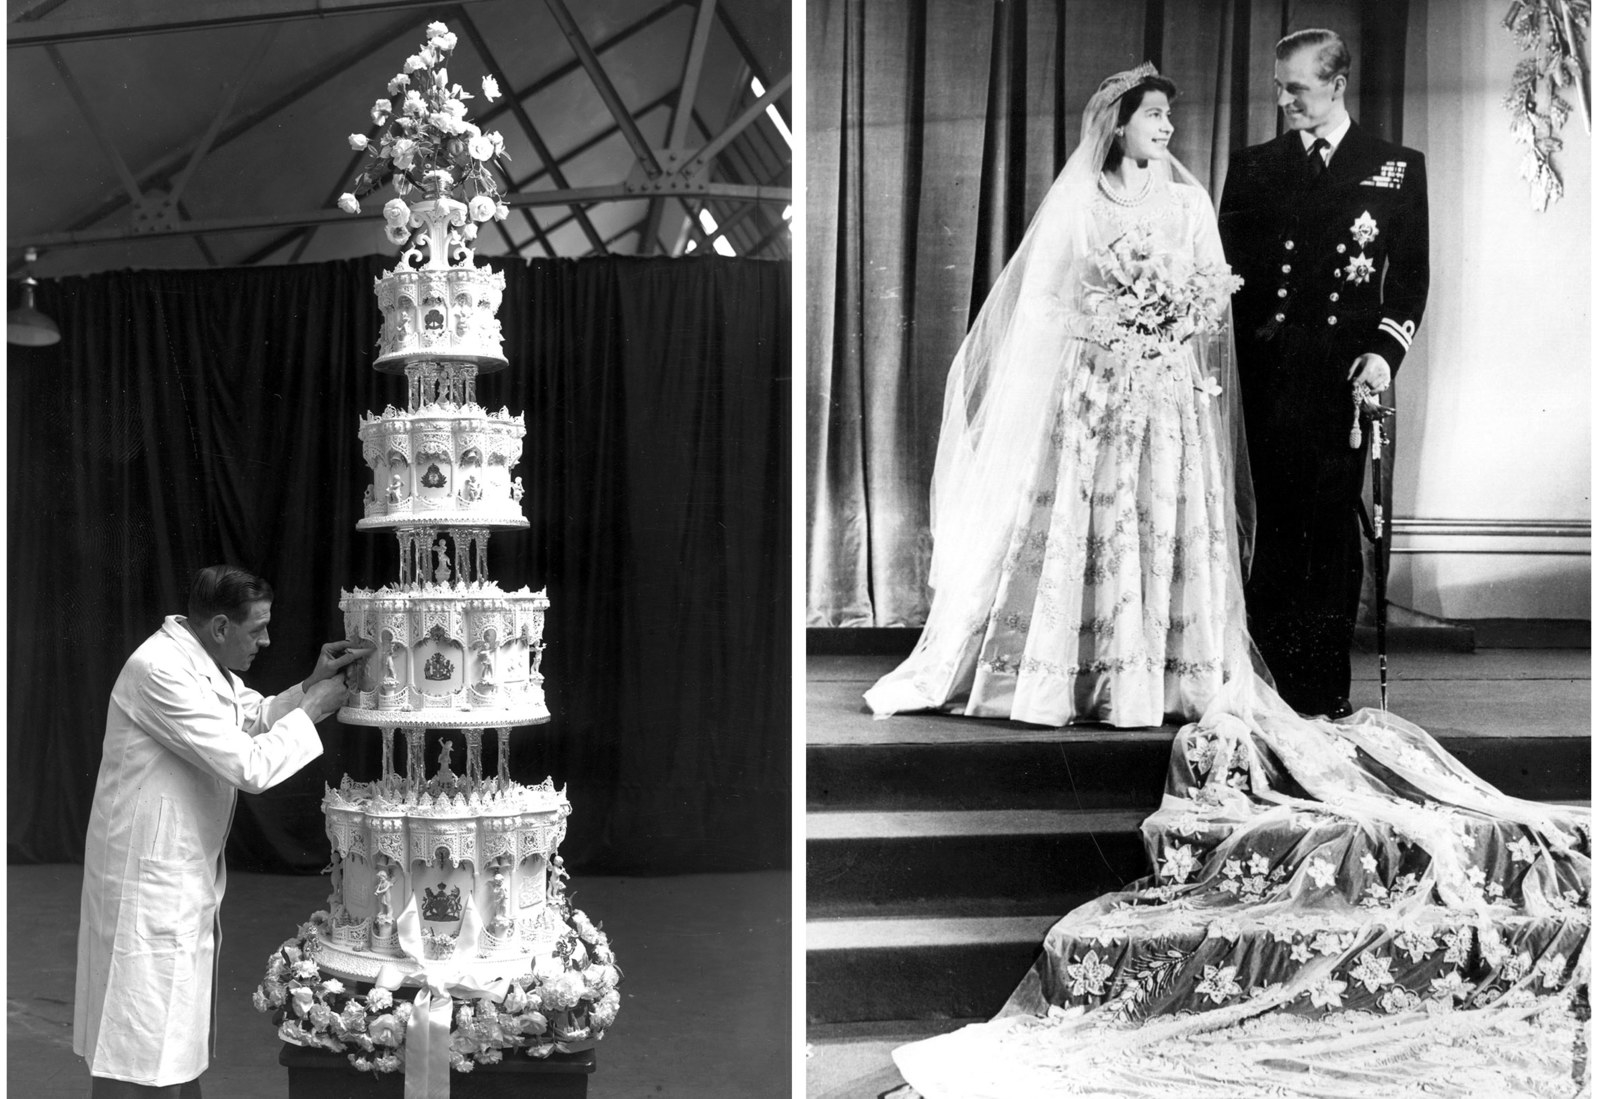 Prince William and Kate Middleton's royal wedding cake to go up for auction  | Fox News